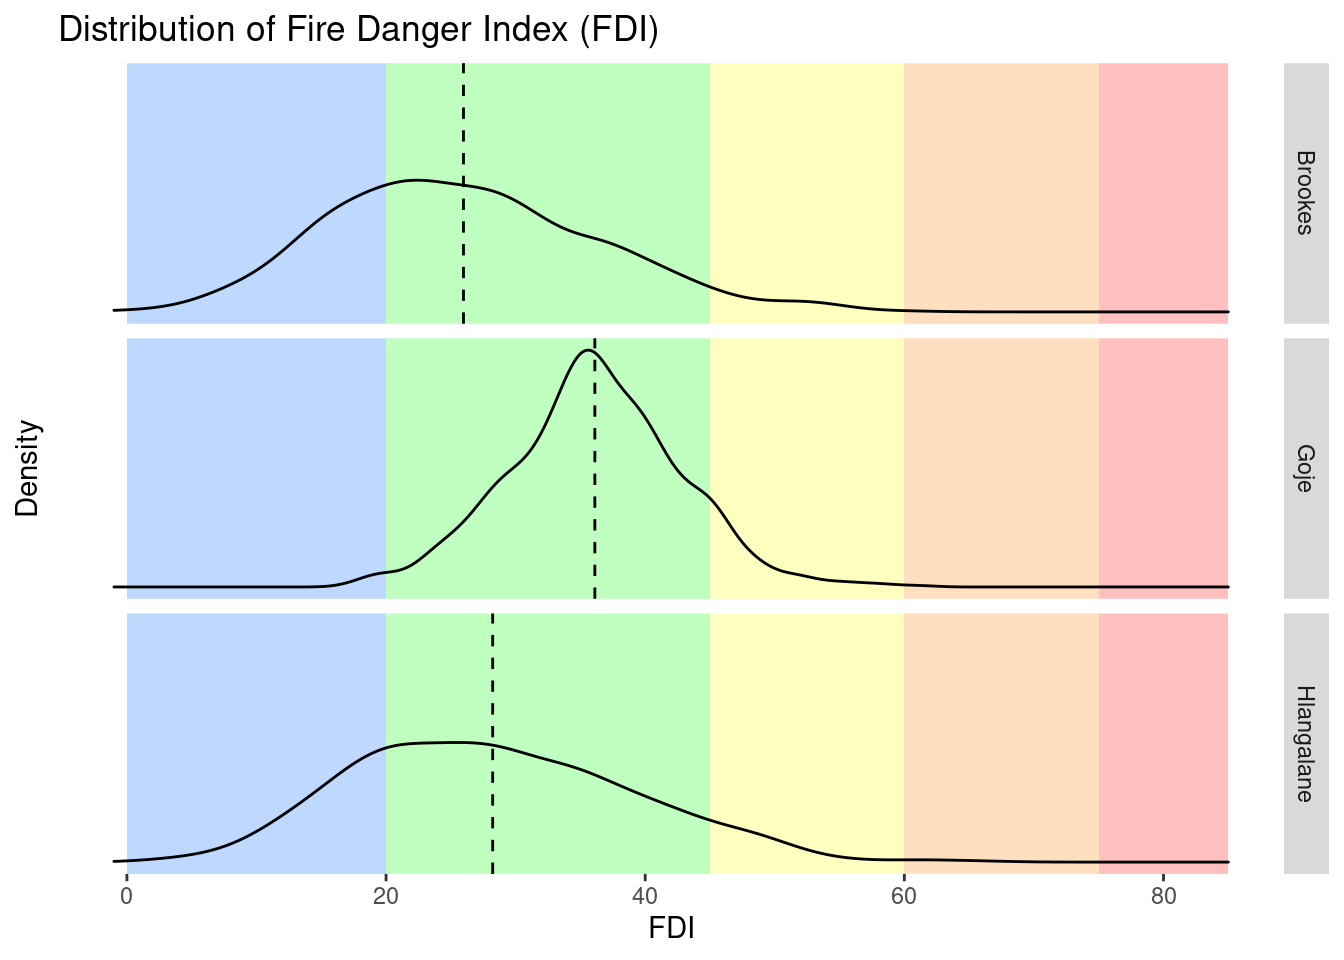 Fire Danger Index distribution for three locations.